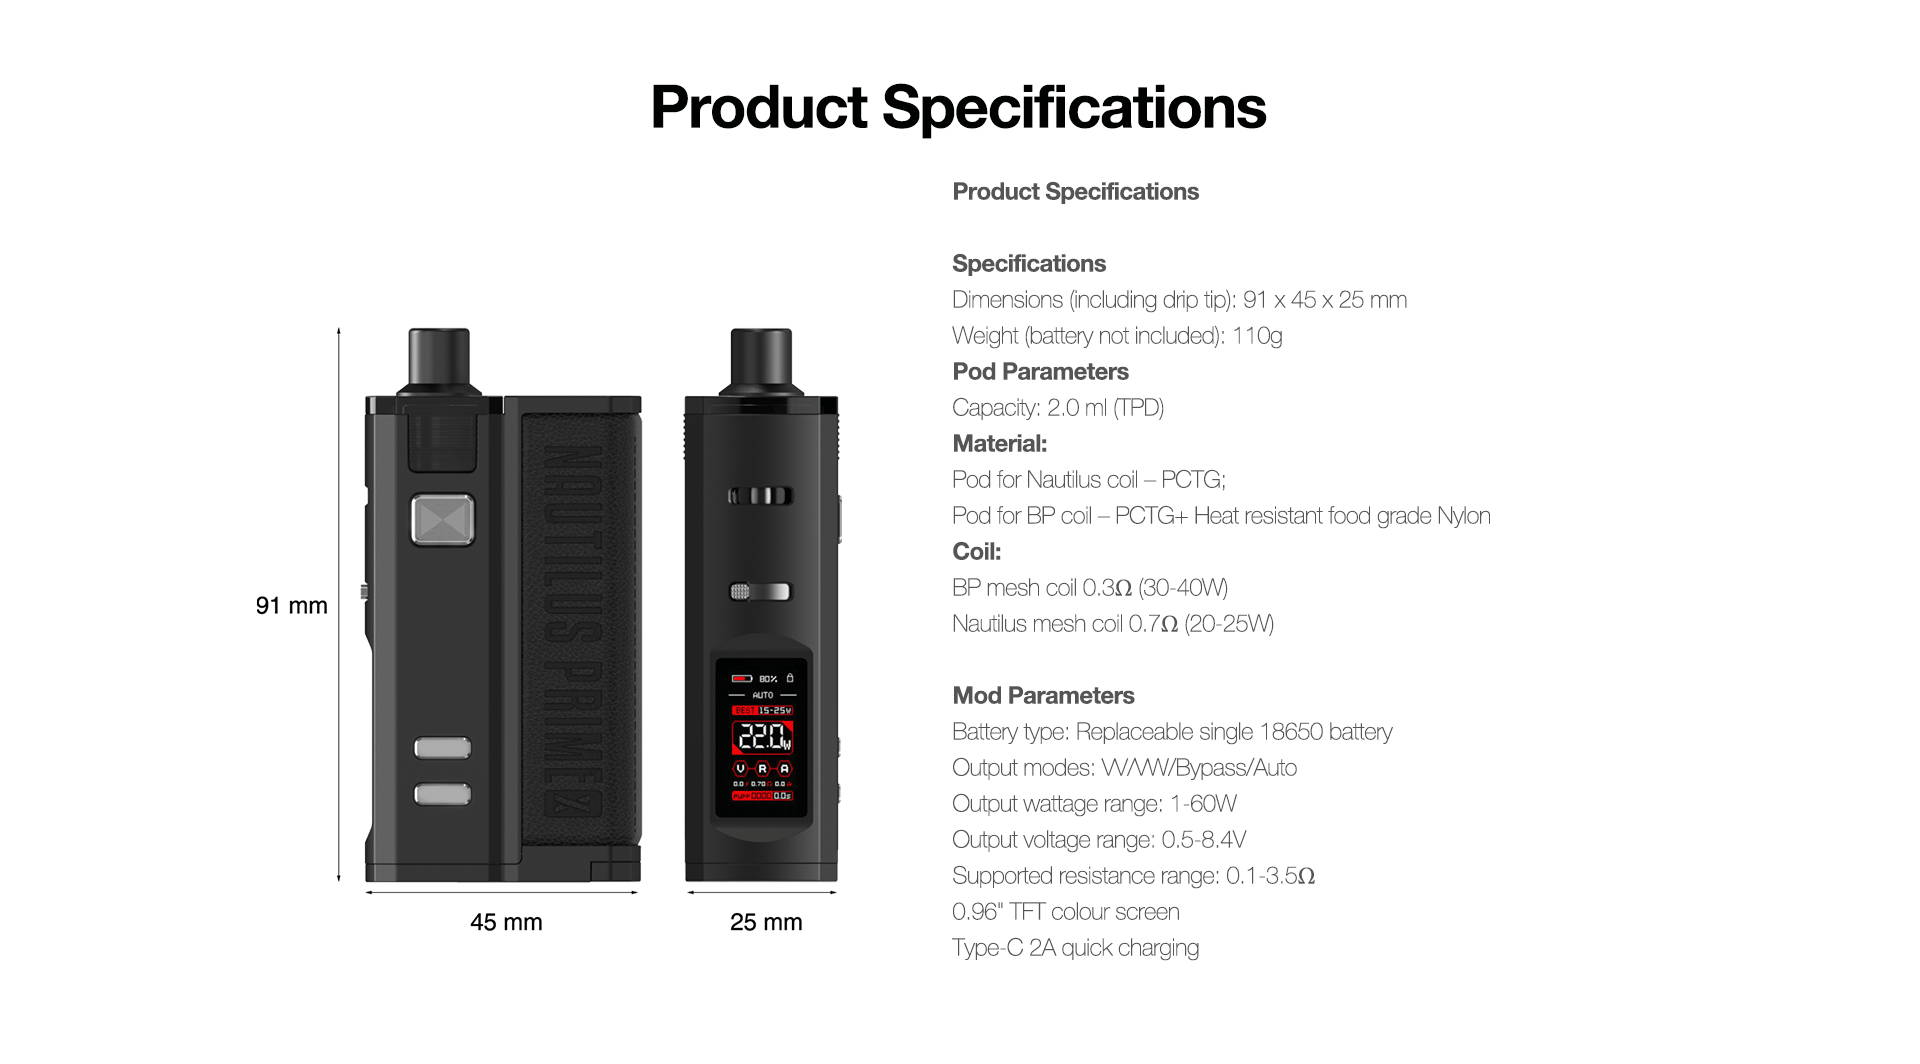 Product Specifications  Specifications Dimensions (including drip tip): 91*45*25 mm Weight (battery not included): 110g Pod Parameters Capacity: 4.0 ml (Pod for BP coil)/ 4.5 ml (Pod for Nautilus coil)/2.0 ml (TPD) Material: Pod for Nautilus coil – PCTG; Pod for BP coil – PCTG+ Heat resistant food grade Nylon Coil: BP mesh coil 0.3ΩΩ(30-40W) Nautilus mesh coil 0.7ΩΩ(20-25W)  Mod Parameters Battery type: Replaceable single 18650 battery Output modes: VV/VW/Bypass/Auto Output wattage range: 1-60W Output voltage range: 0.5-8.4V Supported resistance range: 0.1-3.5ΩΩ 0.96